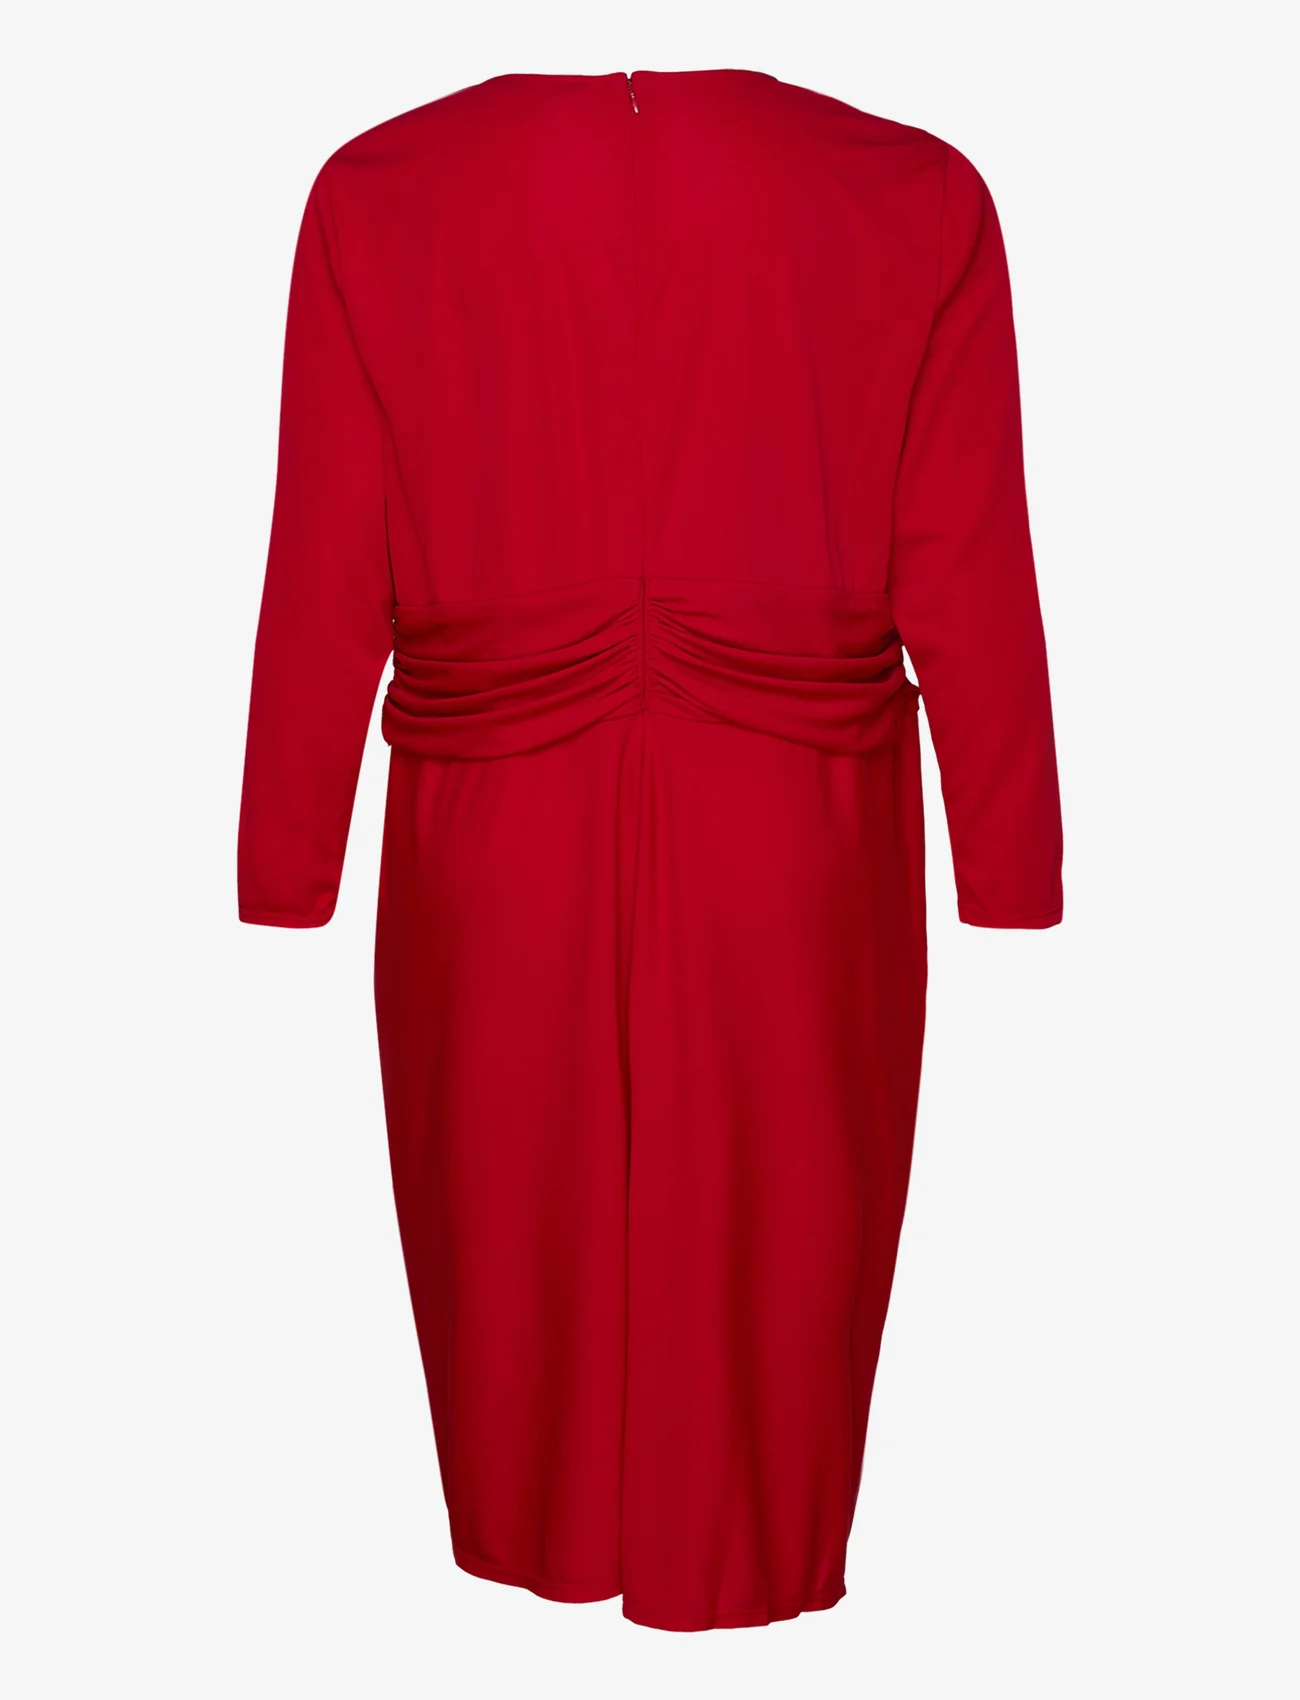 Lauren Women - Ruched Stretch Jersey Surplice Dress - peoriided outlet-hindadega - martin red - 1